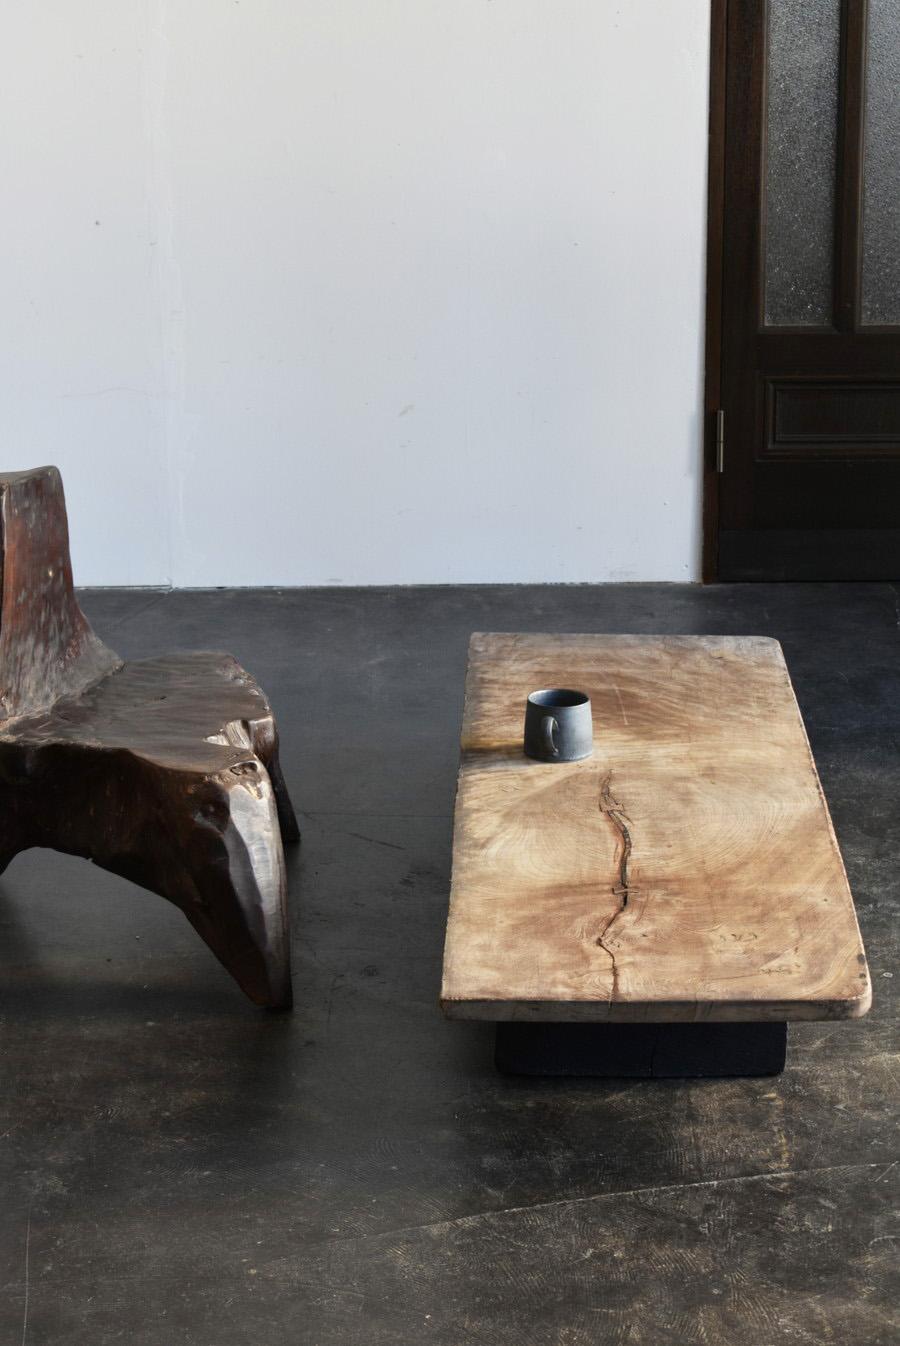 This is a Japanese antique wooden sofa table.
The top and table base are made of zelkova wood.
Keyaki is a high-quality wood that has been used for Japanese furniture since ancient times.
It is a hard material with beautiful wood grain.
The top